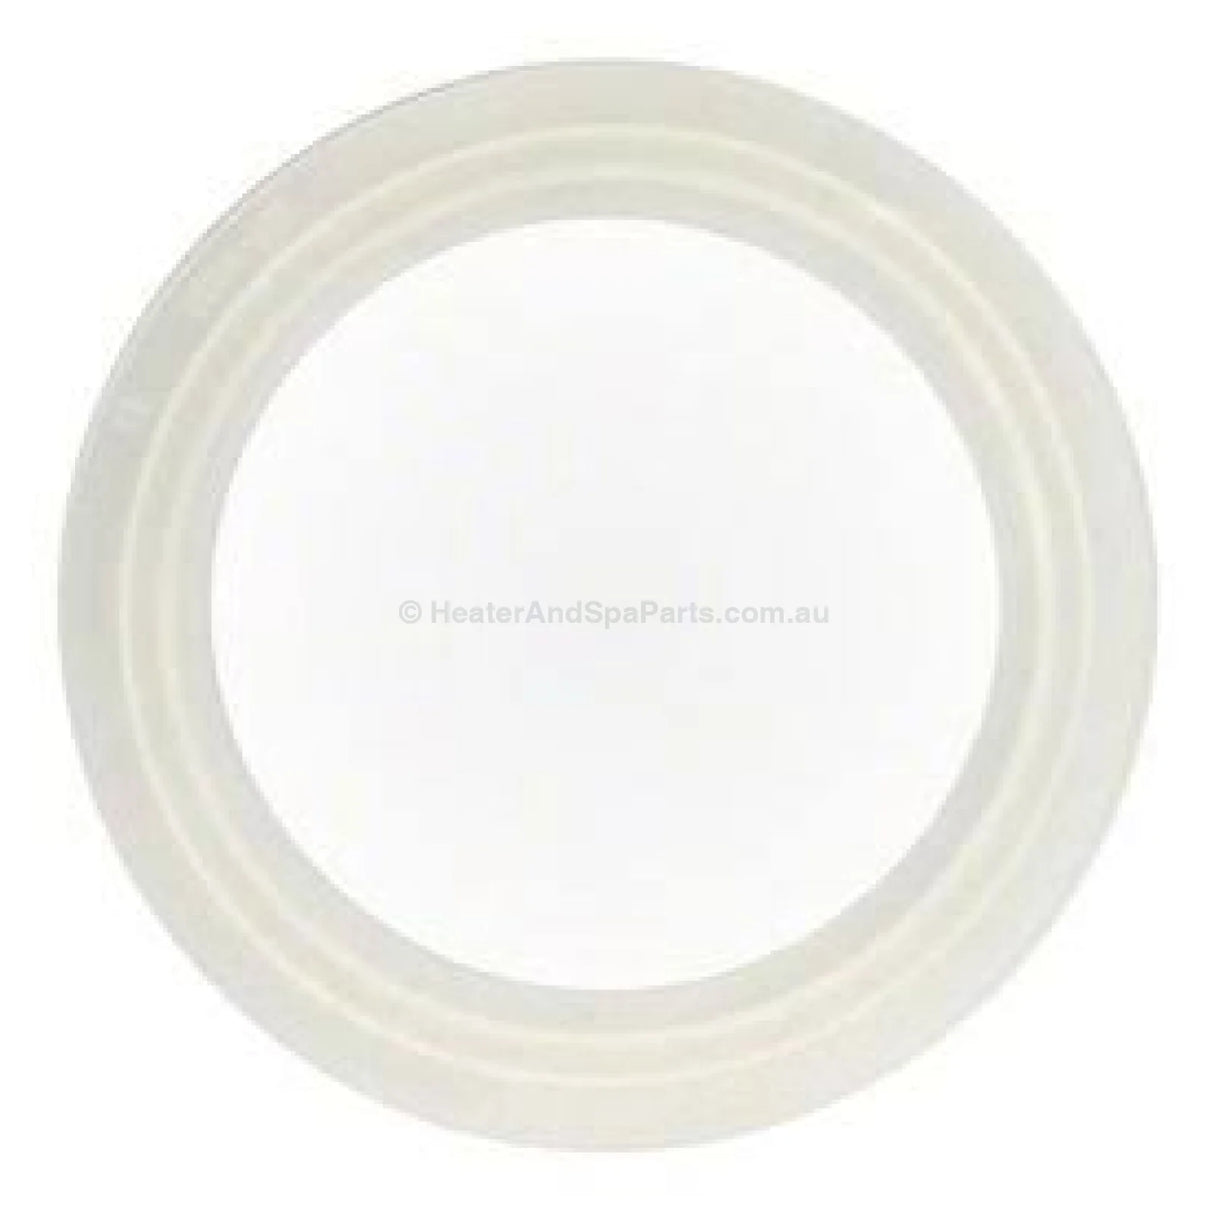 Balboa Gecko Spa Heater Gasket O-Ring Seal - Heater and Spa Parts